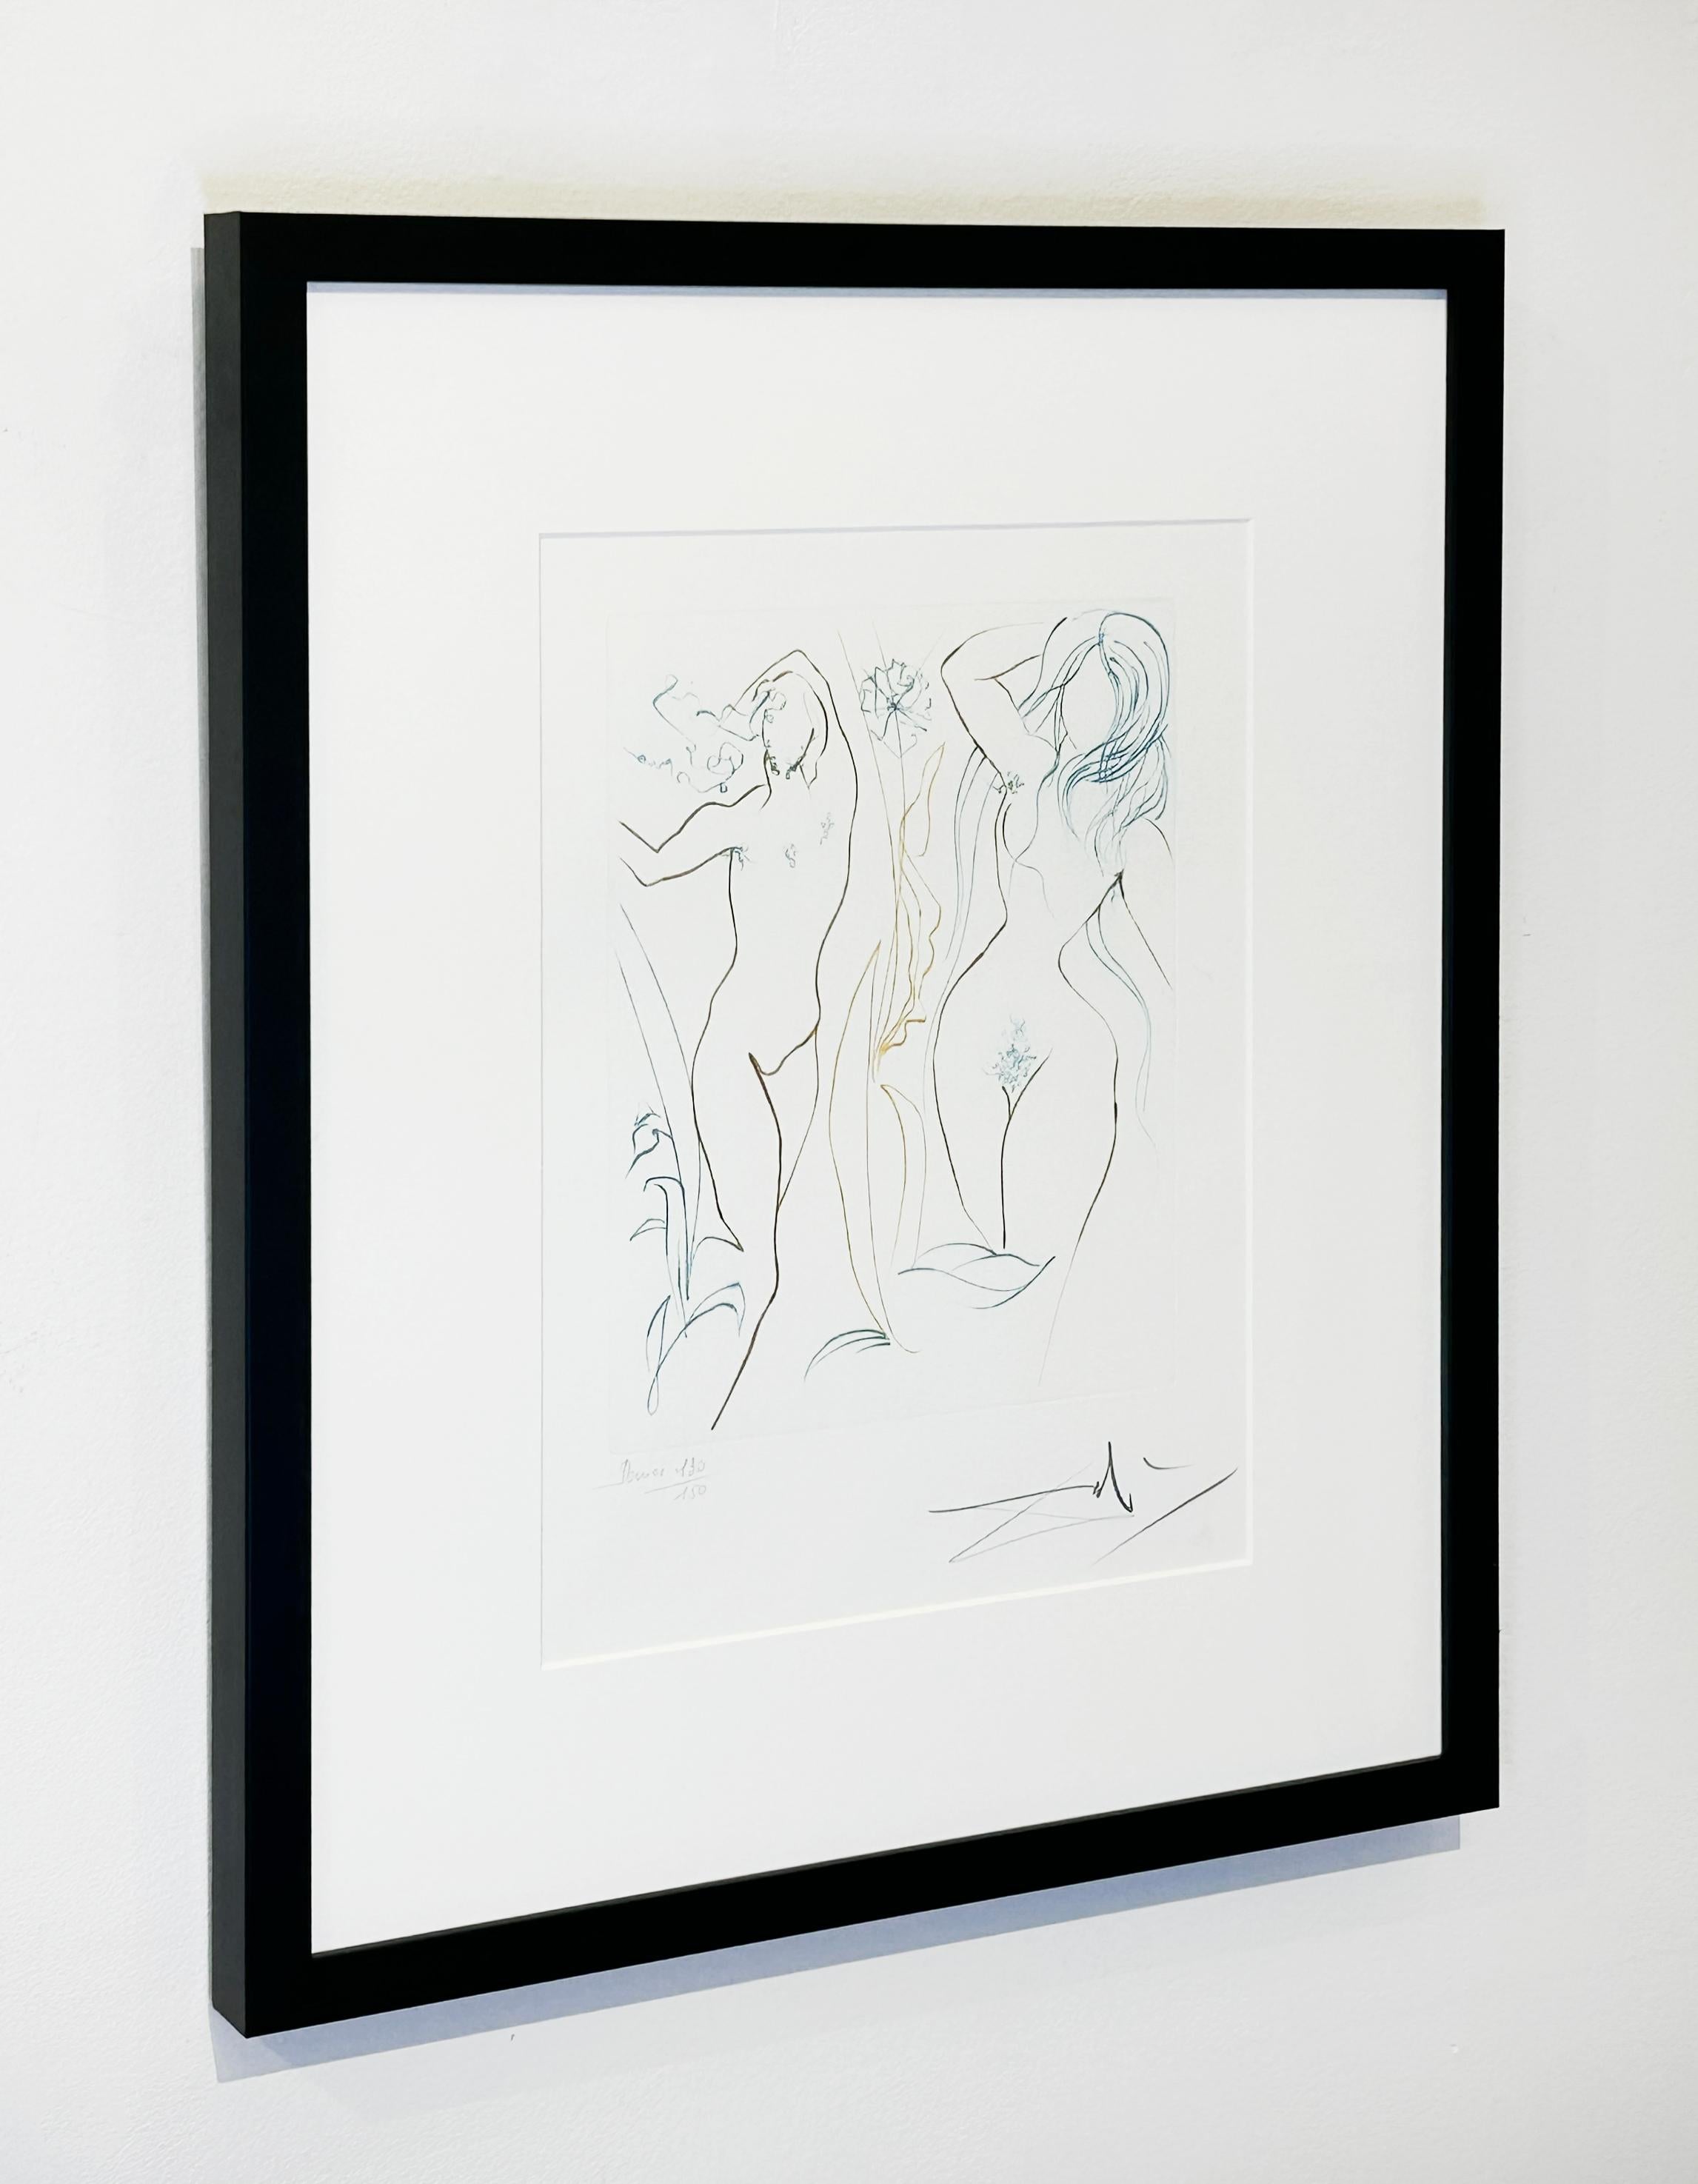 Artist:  Dali, Salvador
Title:  Adam and Eve
Series:  Le Paradis Terrestre
Date:  1974
Medium:  drypoint printed in color
Unframed Dimensions: 10.5